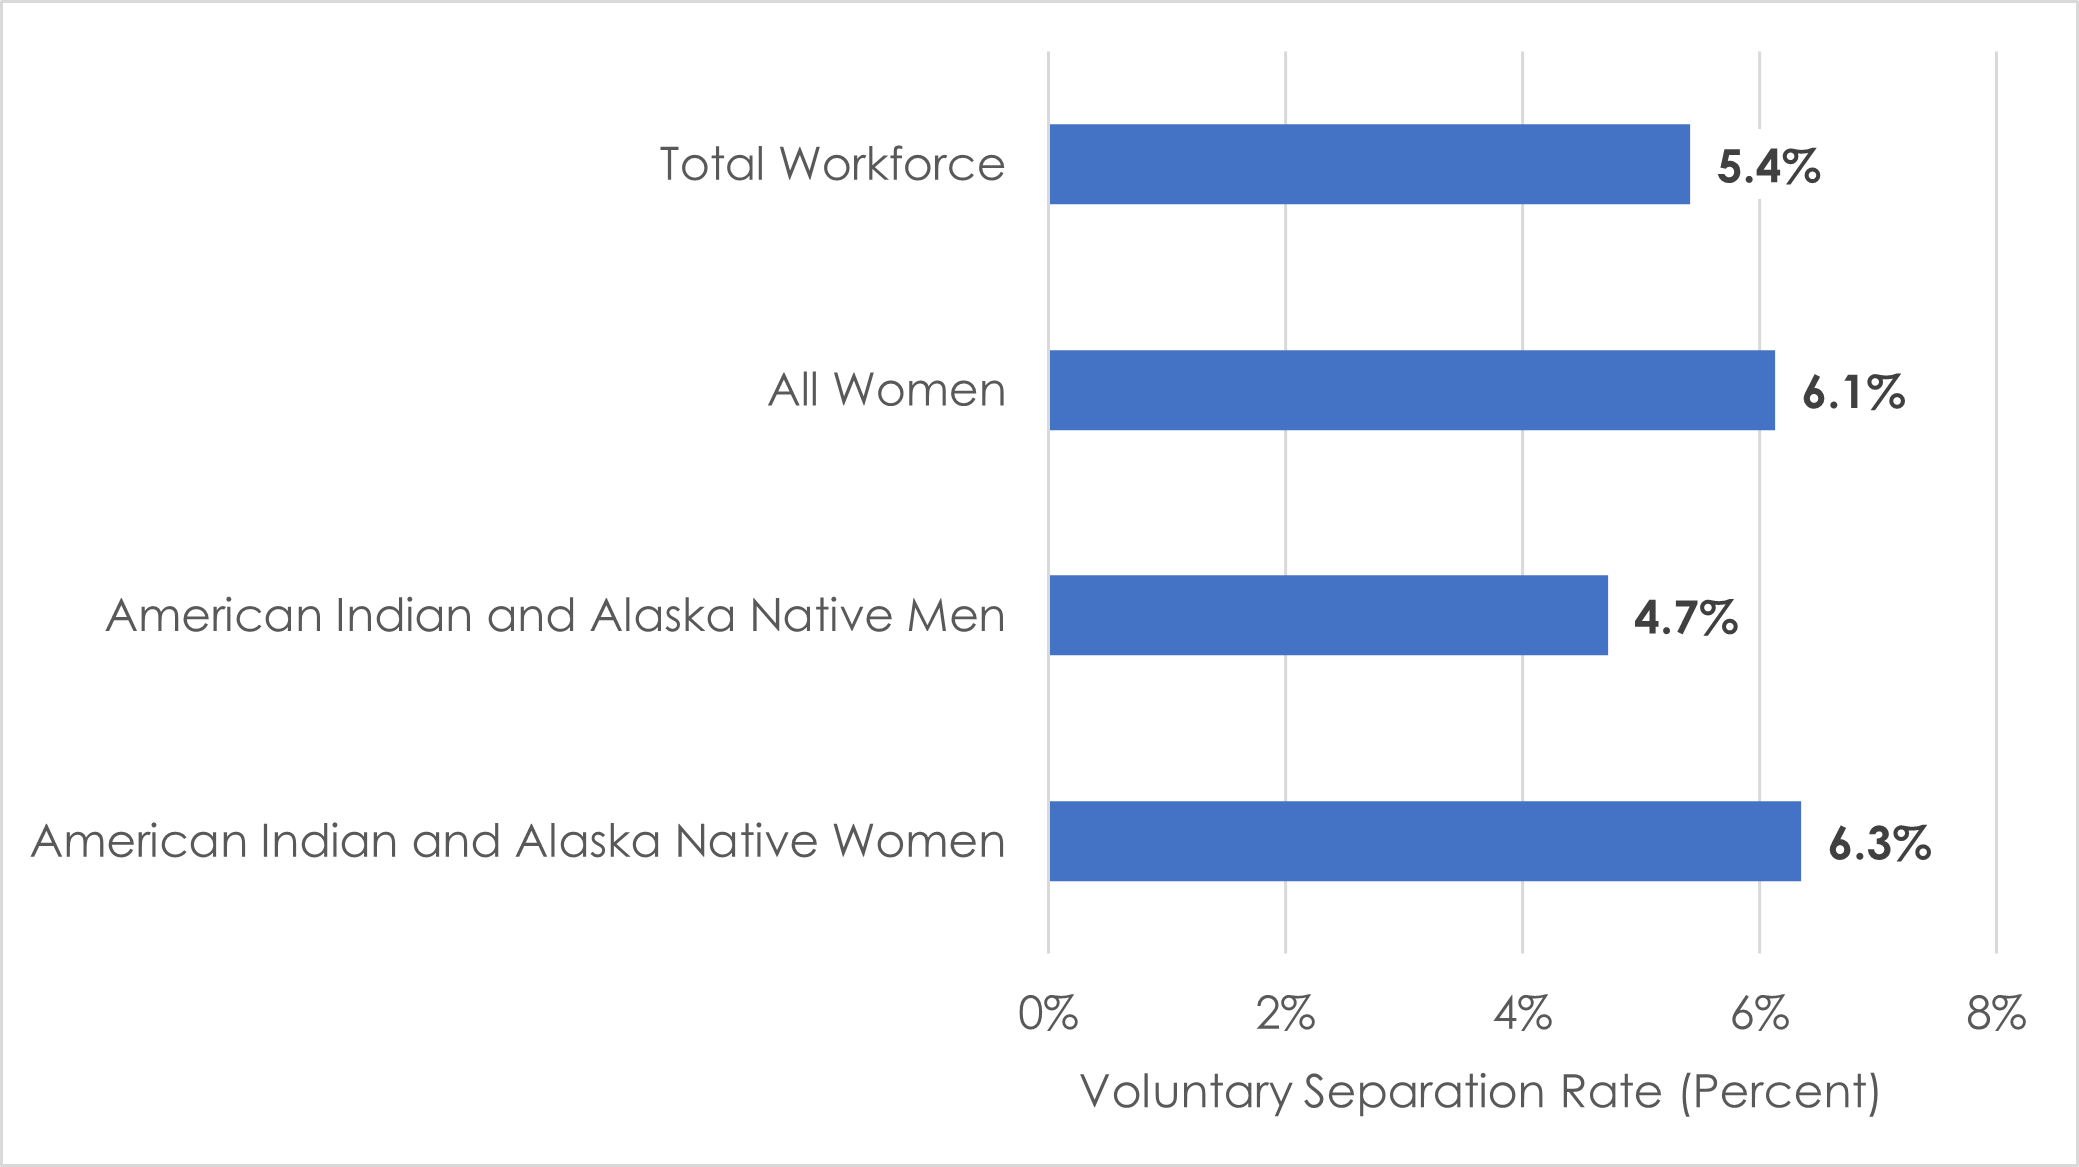 5.4% federal employees voluntary separate.  6.1% women voluntary separate in the federal sector.  4.7% AIAN men voluntary separate in the federal sector.  6.3% AIAN women voluntary separate in the federal sector.